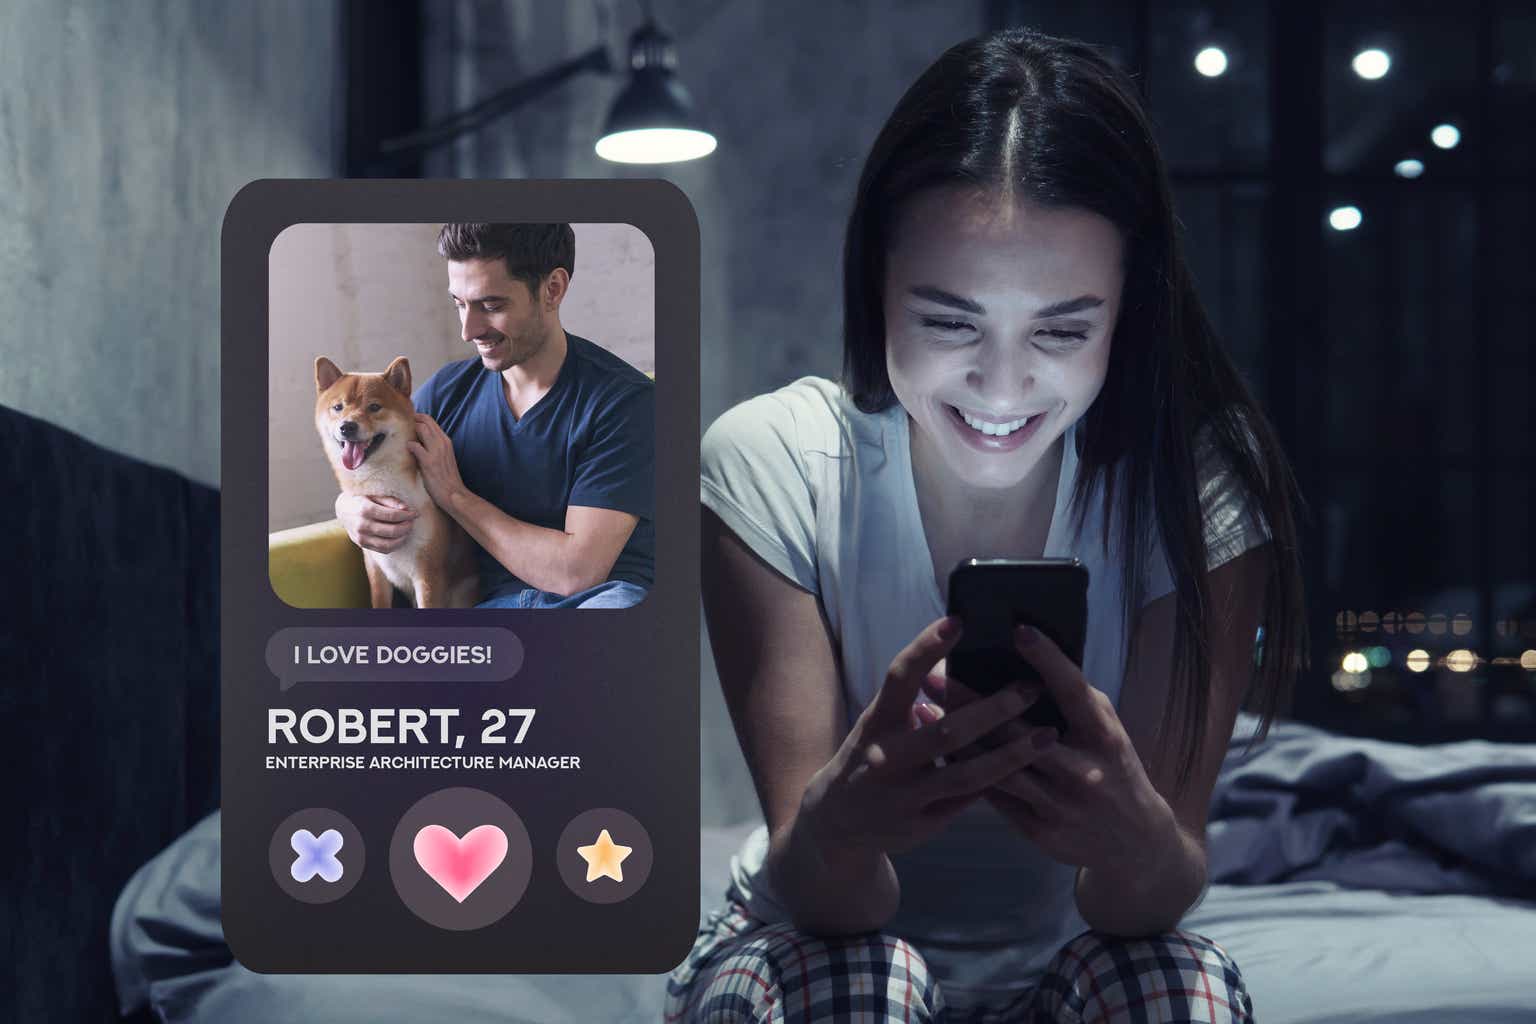 Match Group: The Dating App Empire You Need To Swipe Right On (NASDAQ:MTCH)